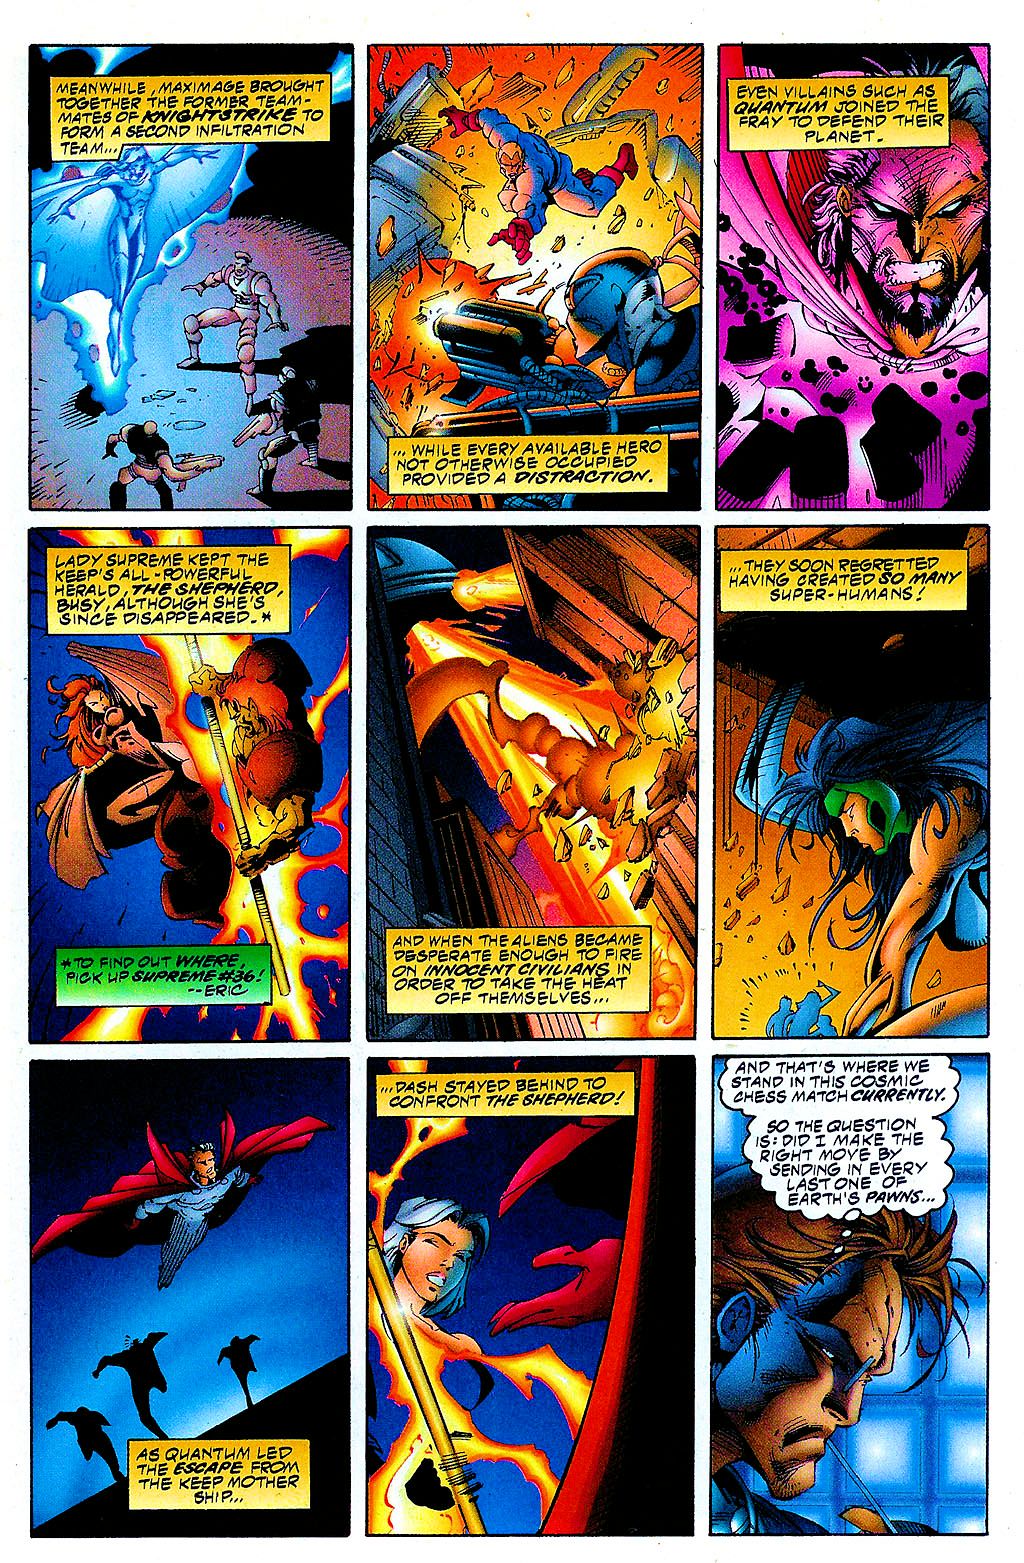 Read online Extreme Destroyer comic -  Issue # Issue Epilogue - 6